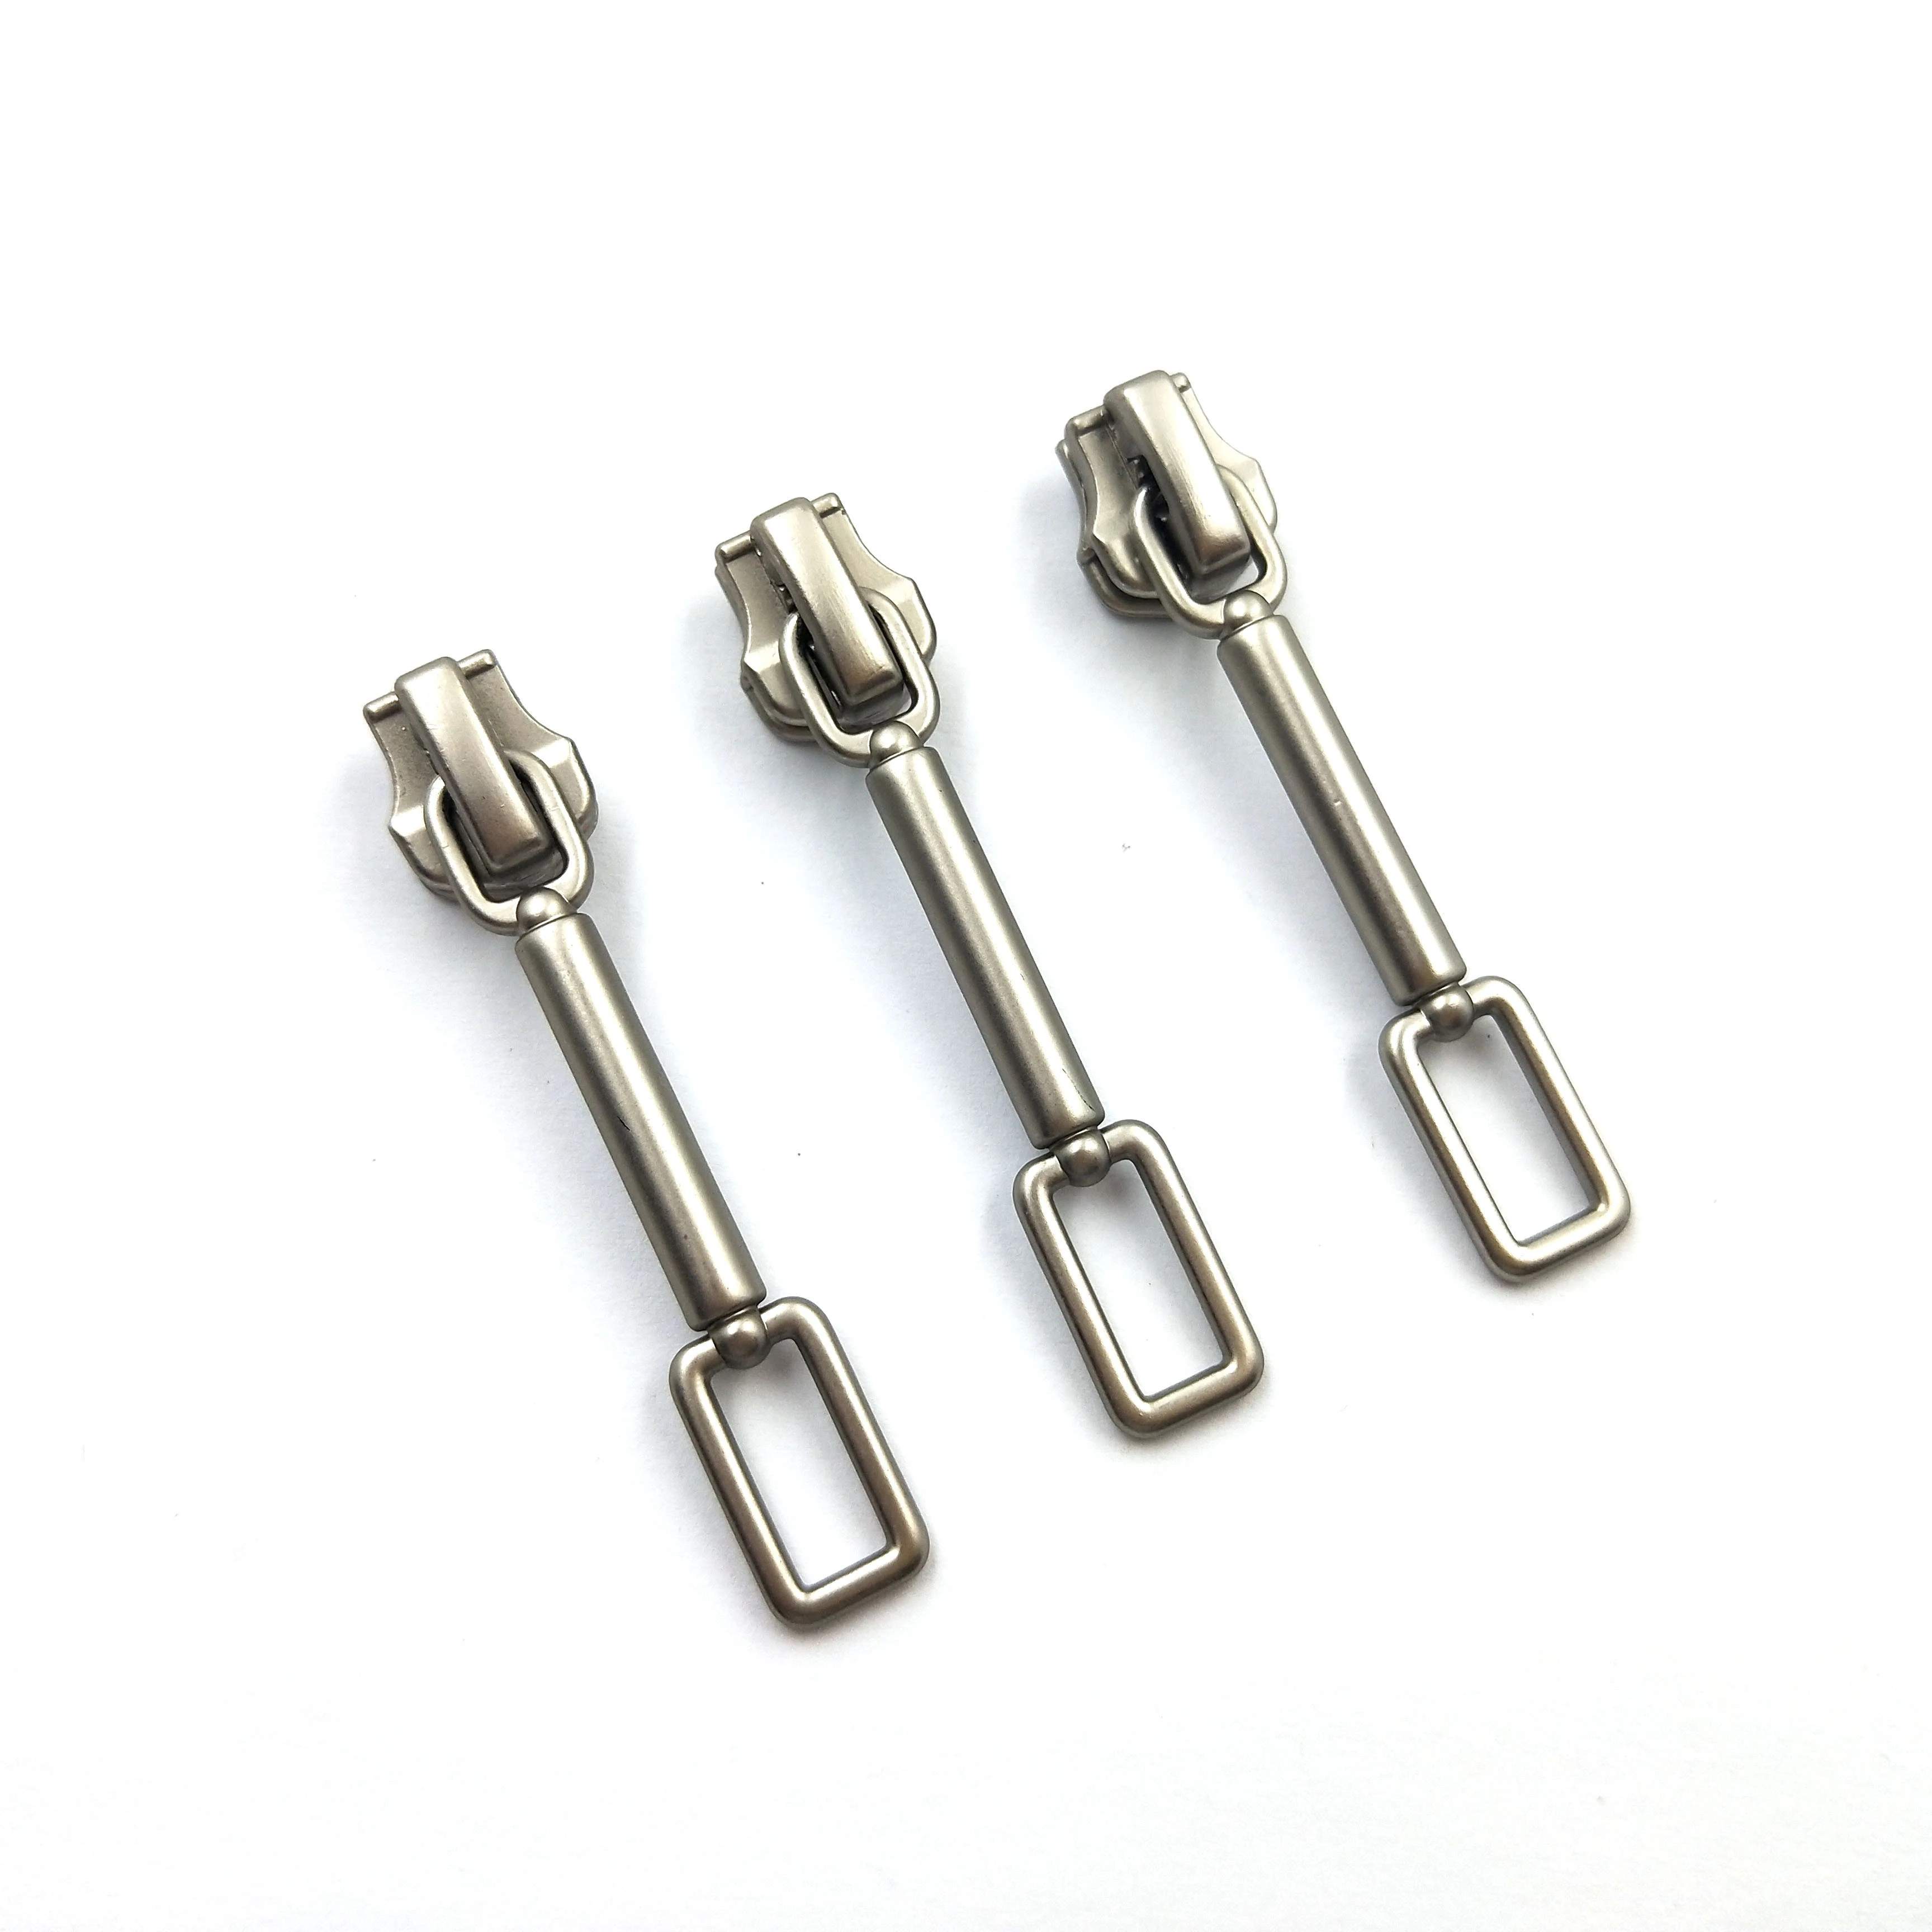 Fashion 5# gold/silver zipper sliders and puller for garment